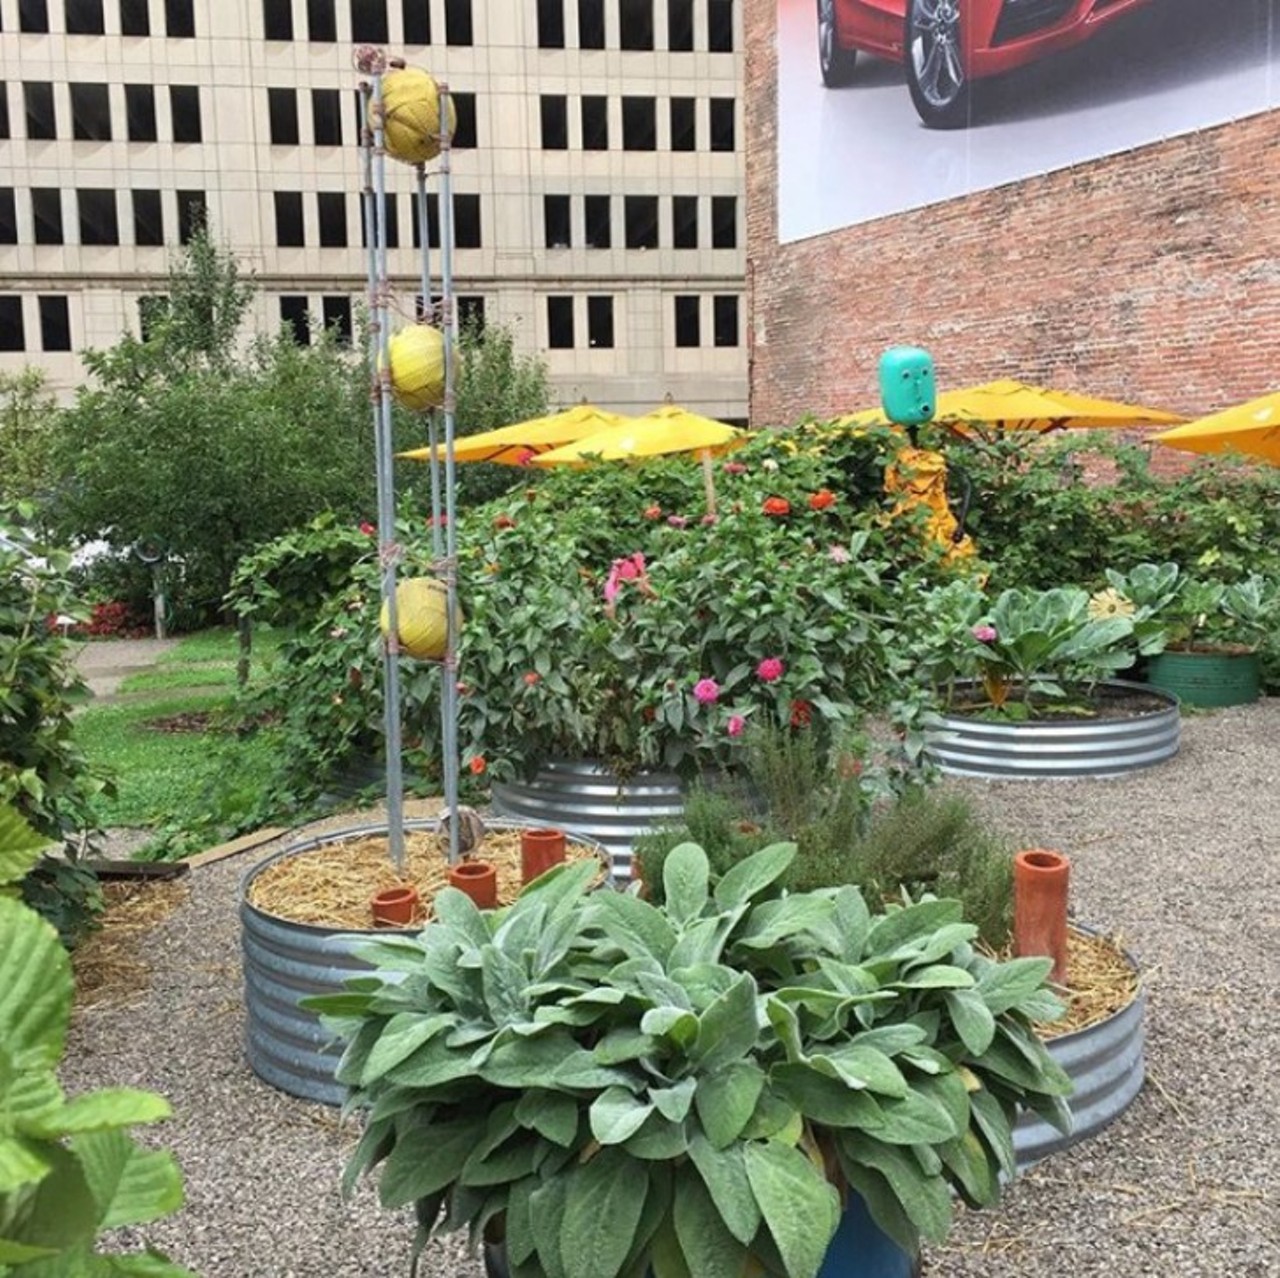 Lafayette Greens
132 W. Lafayette Blvd., Detroit
Located in the heart of Downtown Detroit, Lafayette Greens is a lush urban garden space to relax in. In addition to providing an attractive spot of greenery, the garden donates much of what it grows to local churches or community food banks.
Photo via@jamiecamp